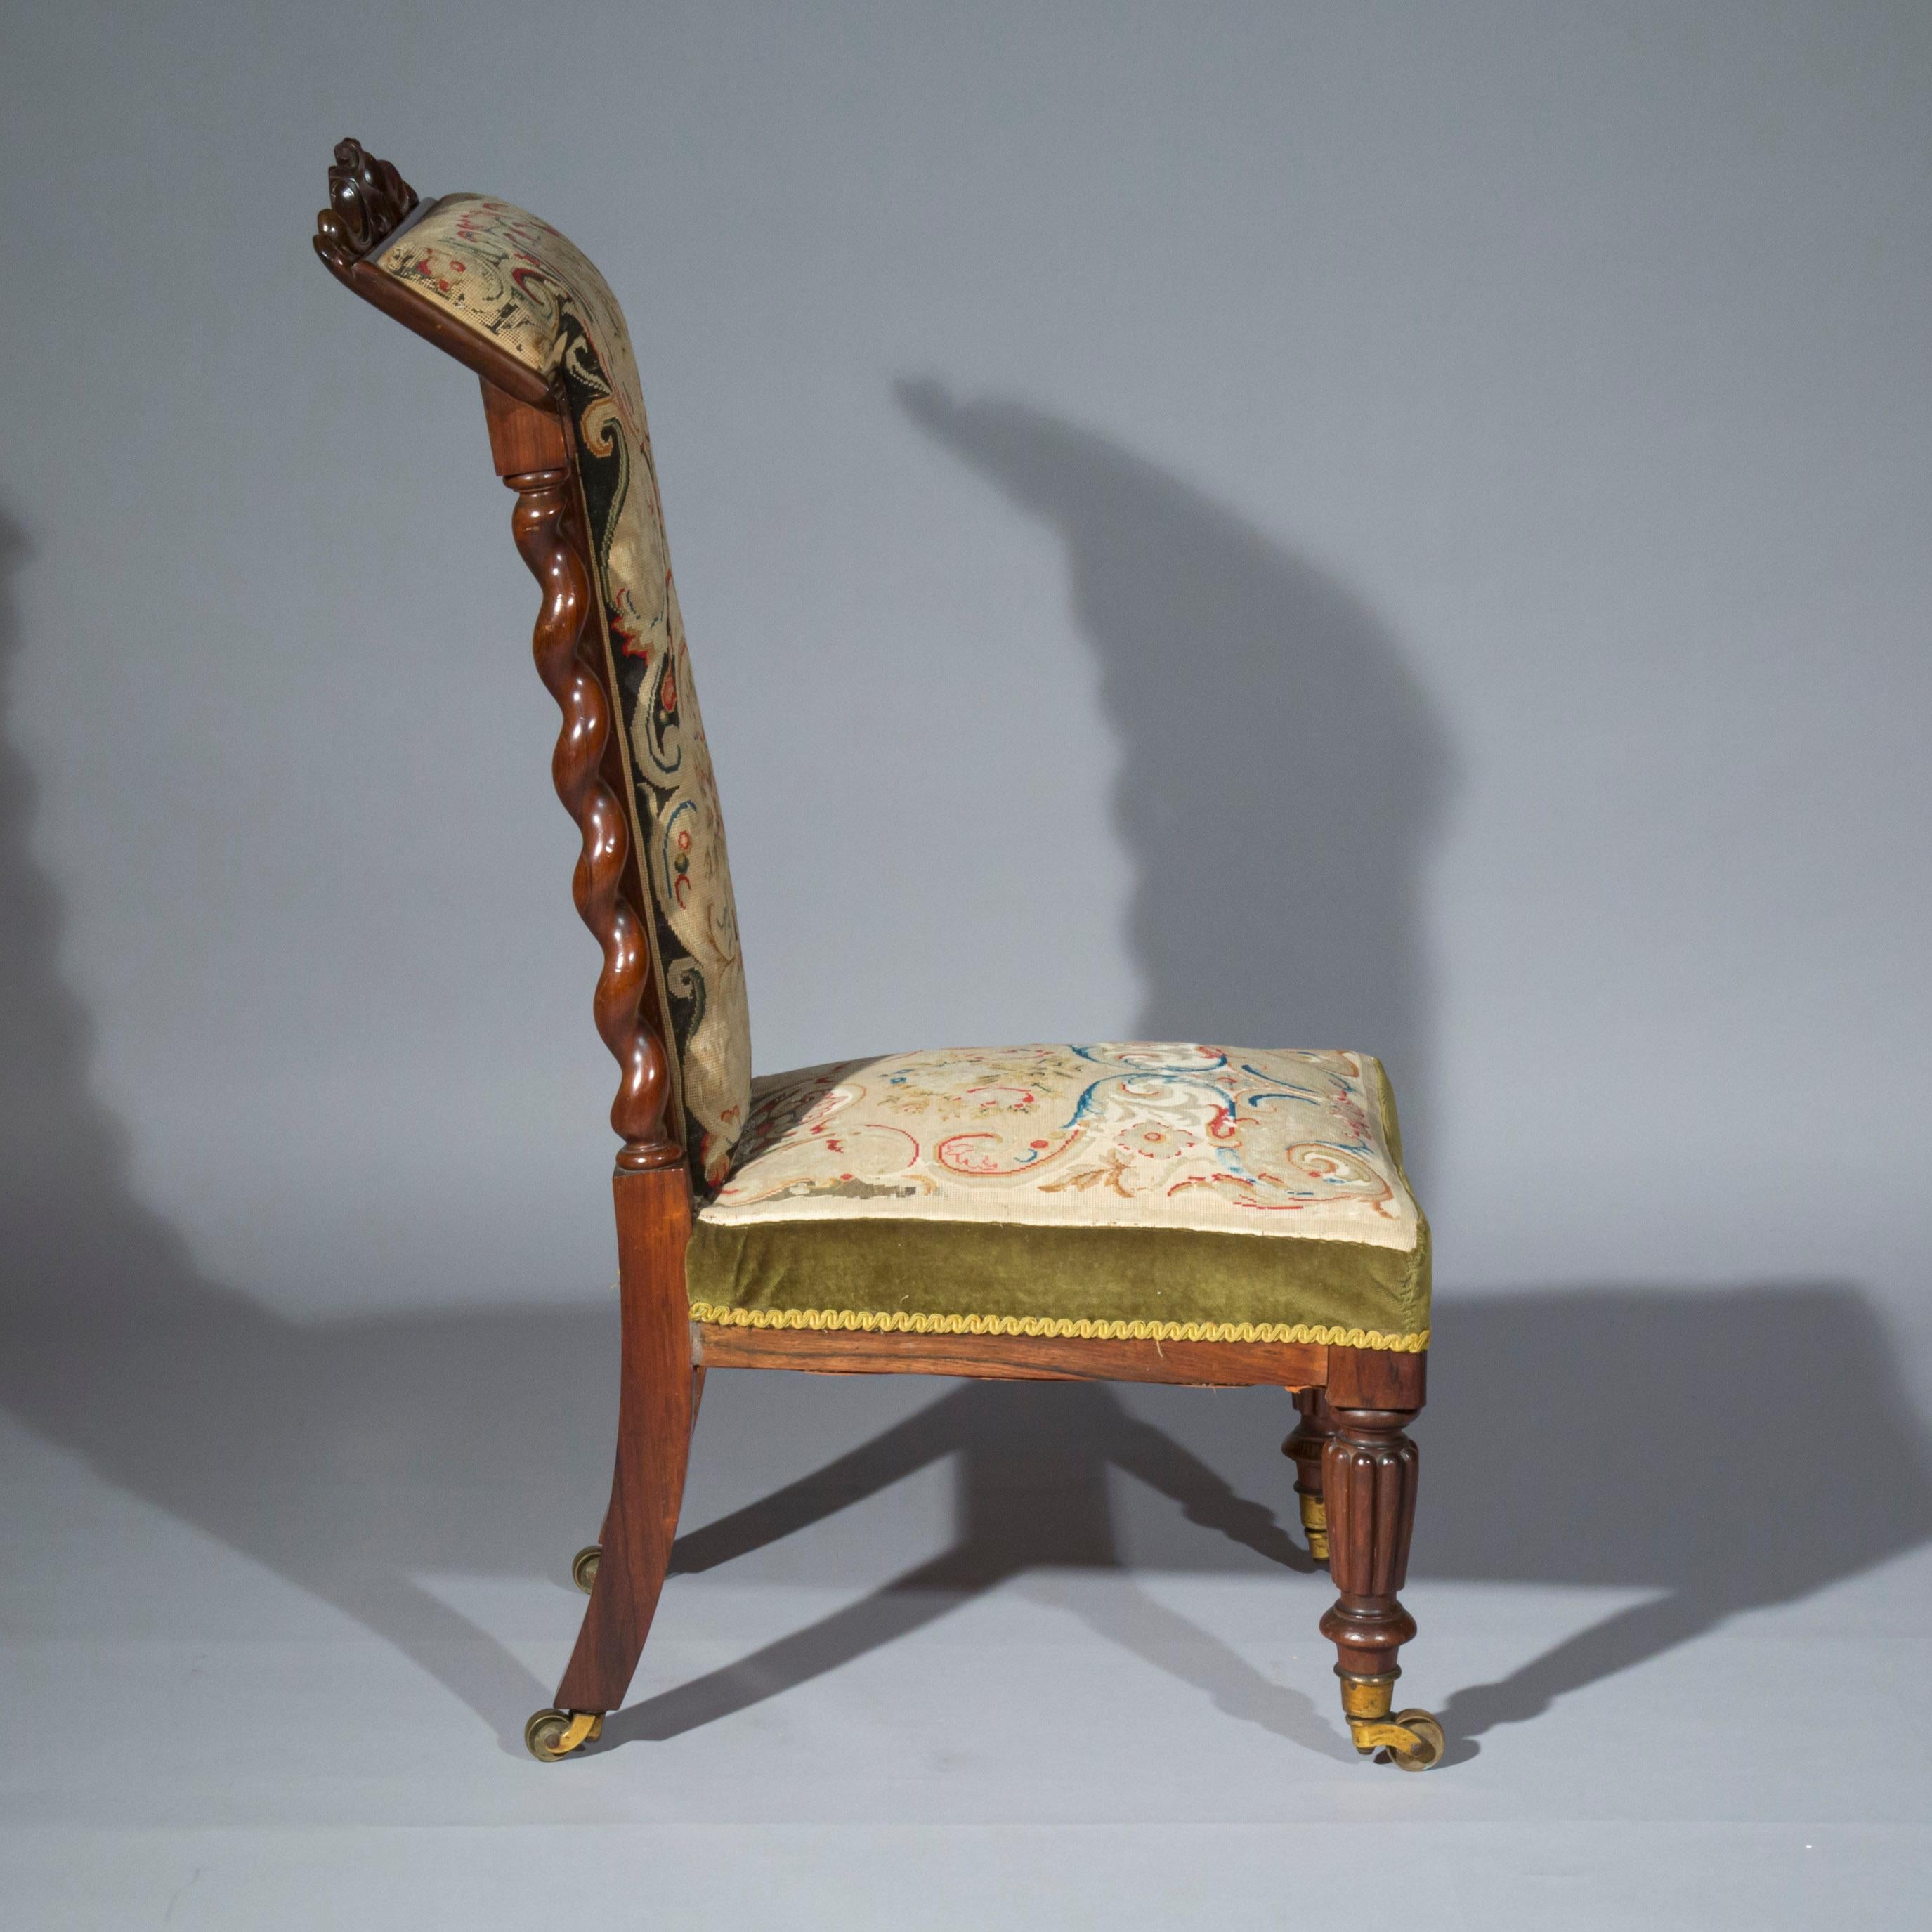 An interesting early 19th century slipper chair of small proportions, retaining original needlework upholstery, English, circa 1835.

The chair provides a useful and versatile low seating, it may be used in a conventional way or straddled, its back